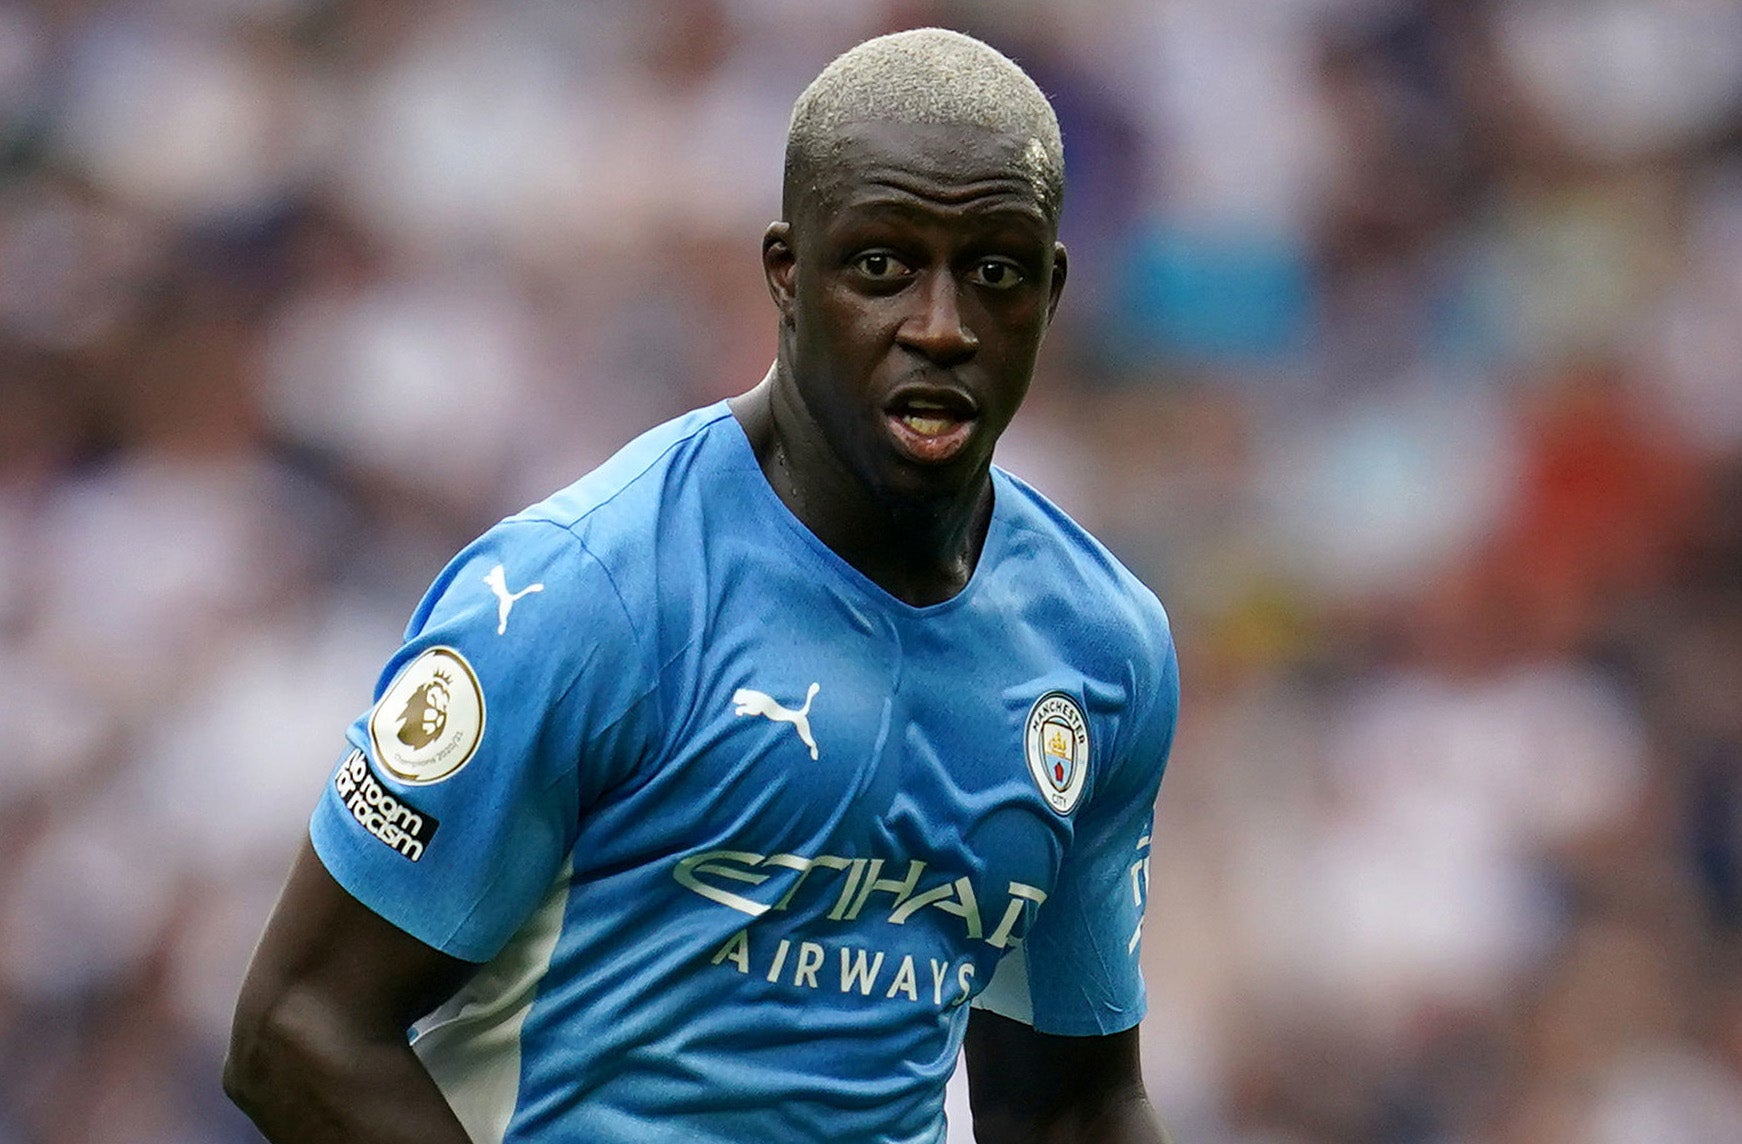 Mendy was suspended by City after being charged by police, pending an investigation